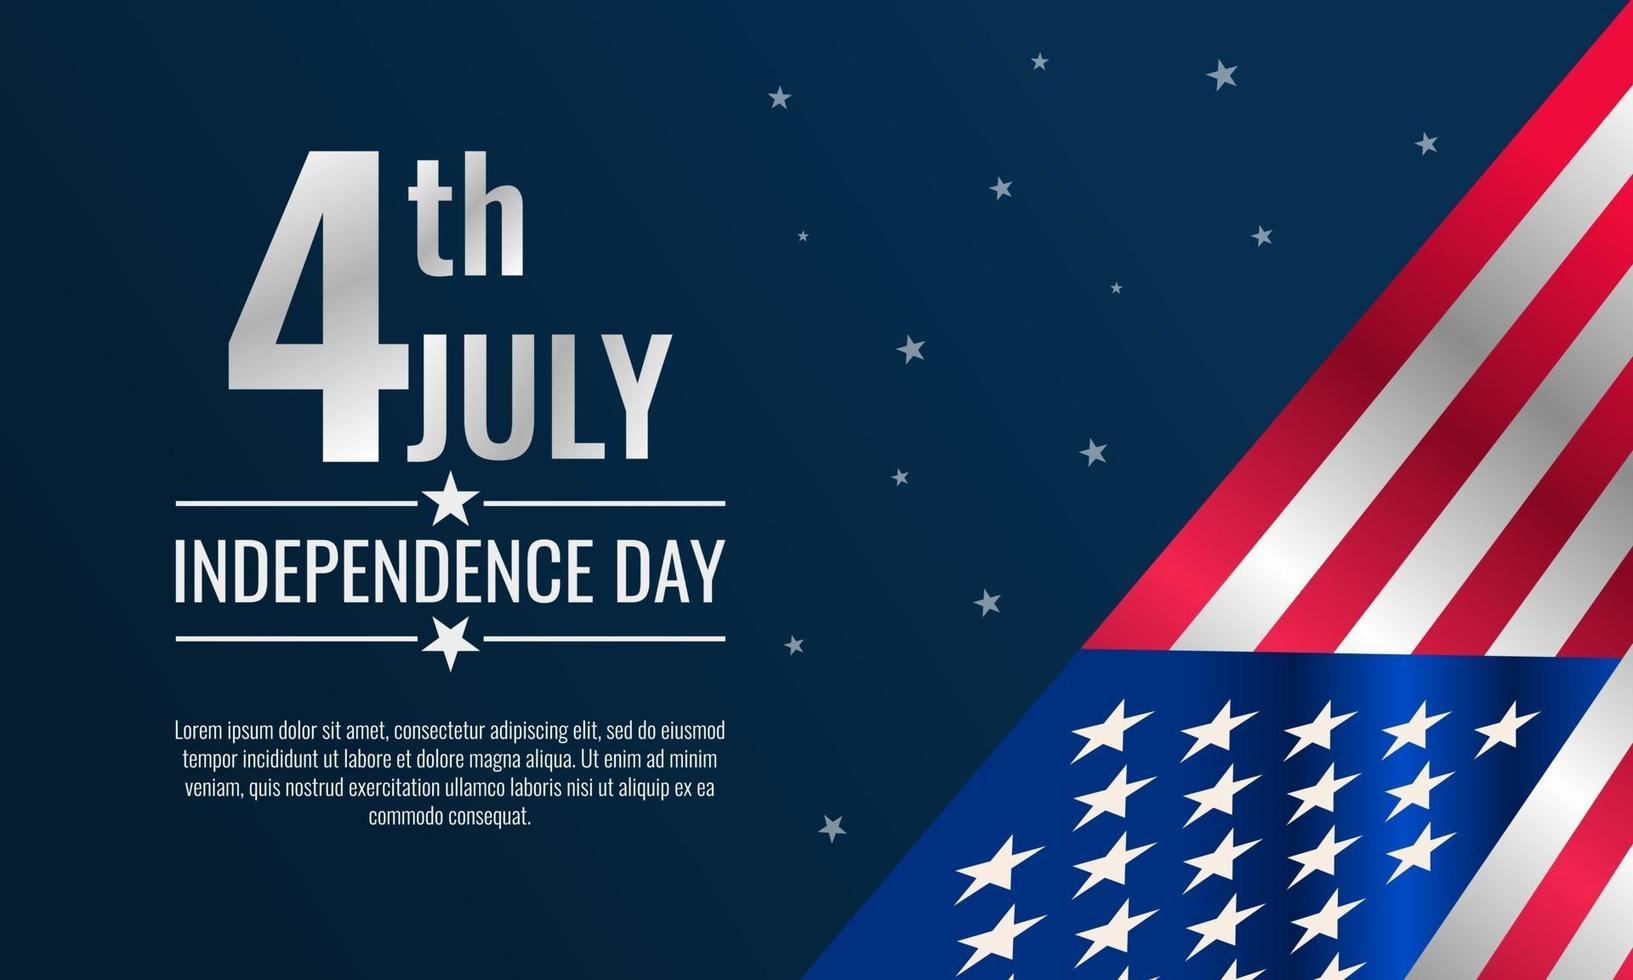 Independence Day background template with American flag design vector